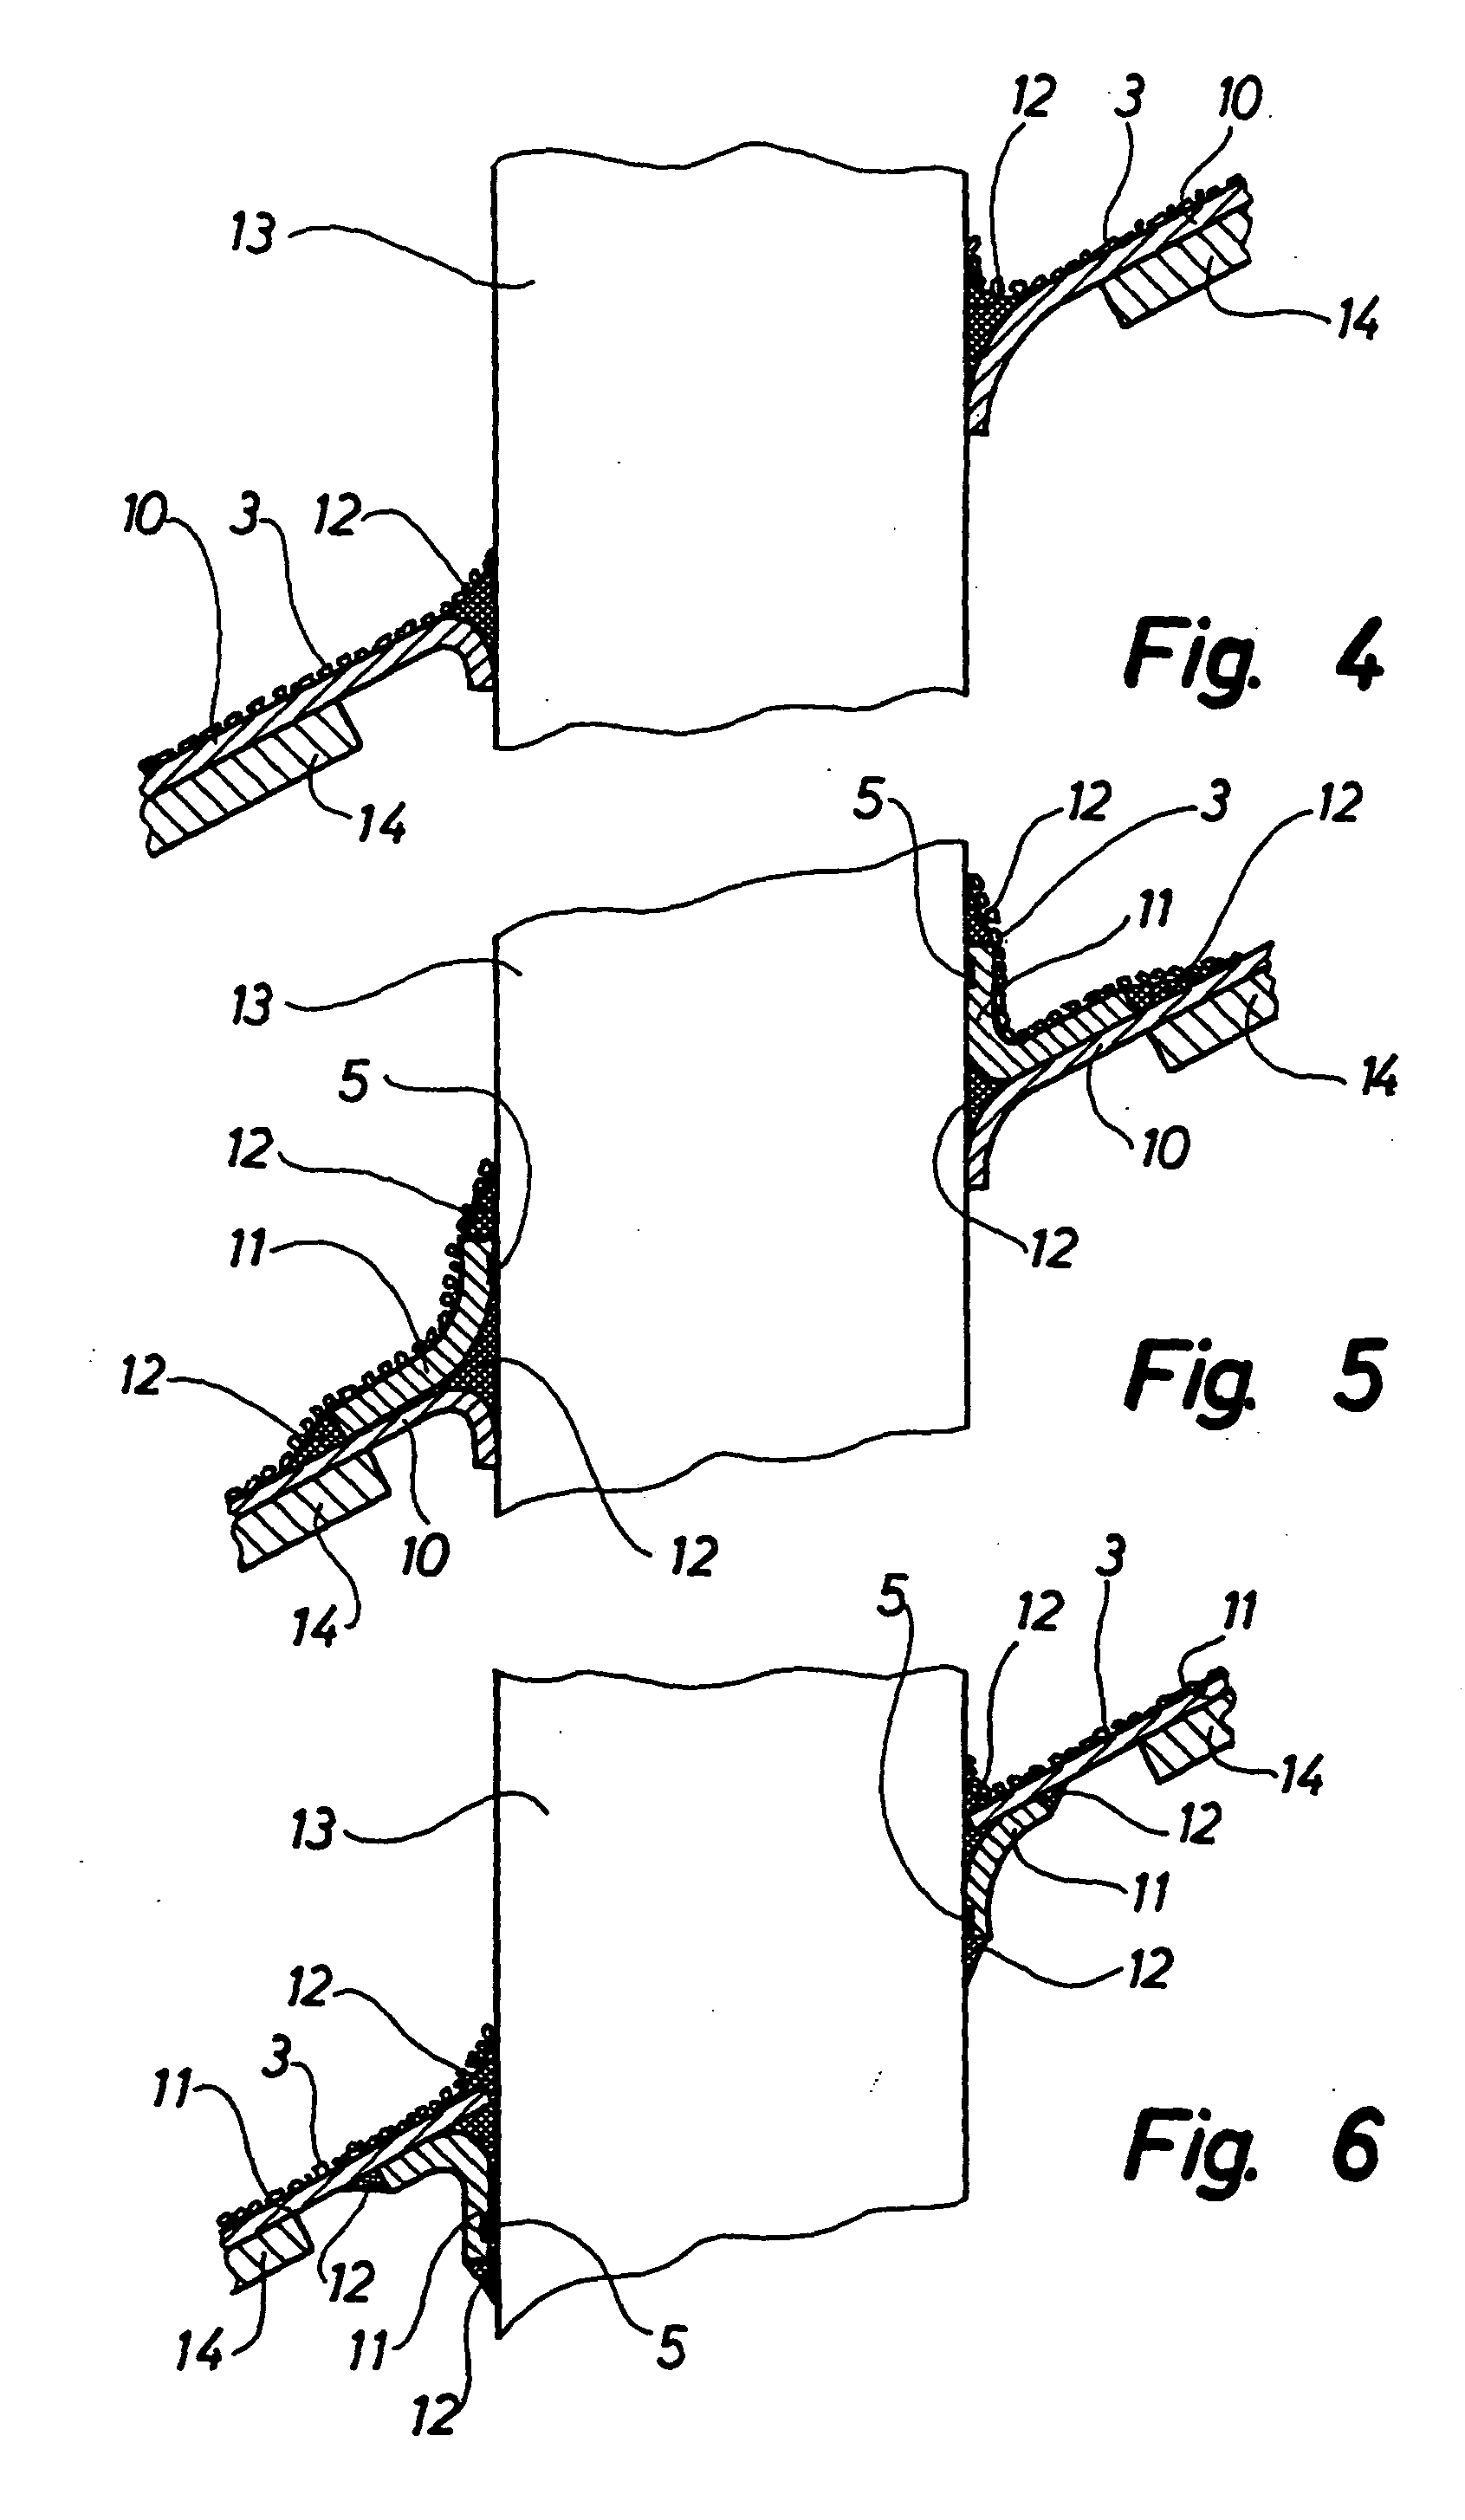 Plate-shaped cover material